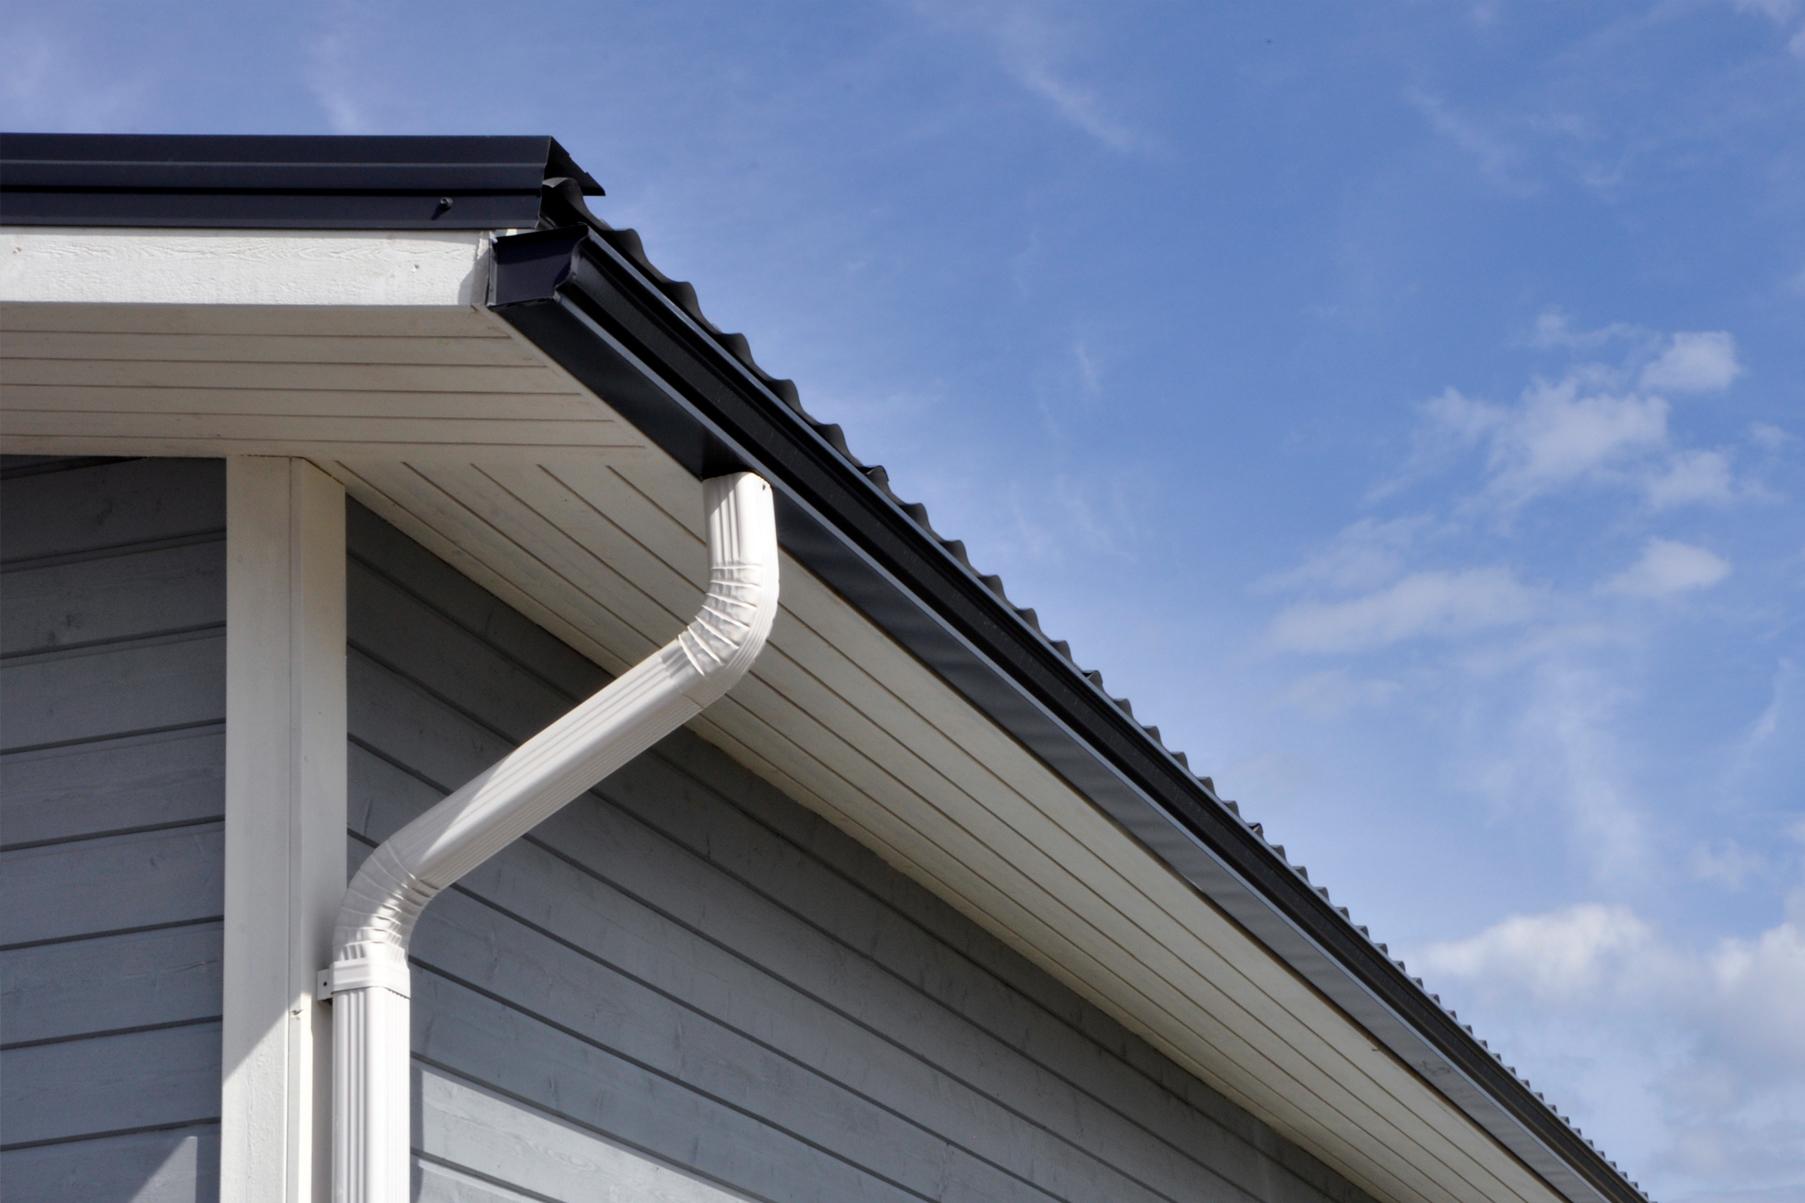 K-style gutter and down pipe is available in all colors of the roof and facade.